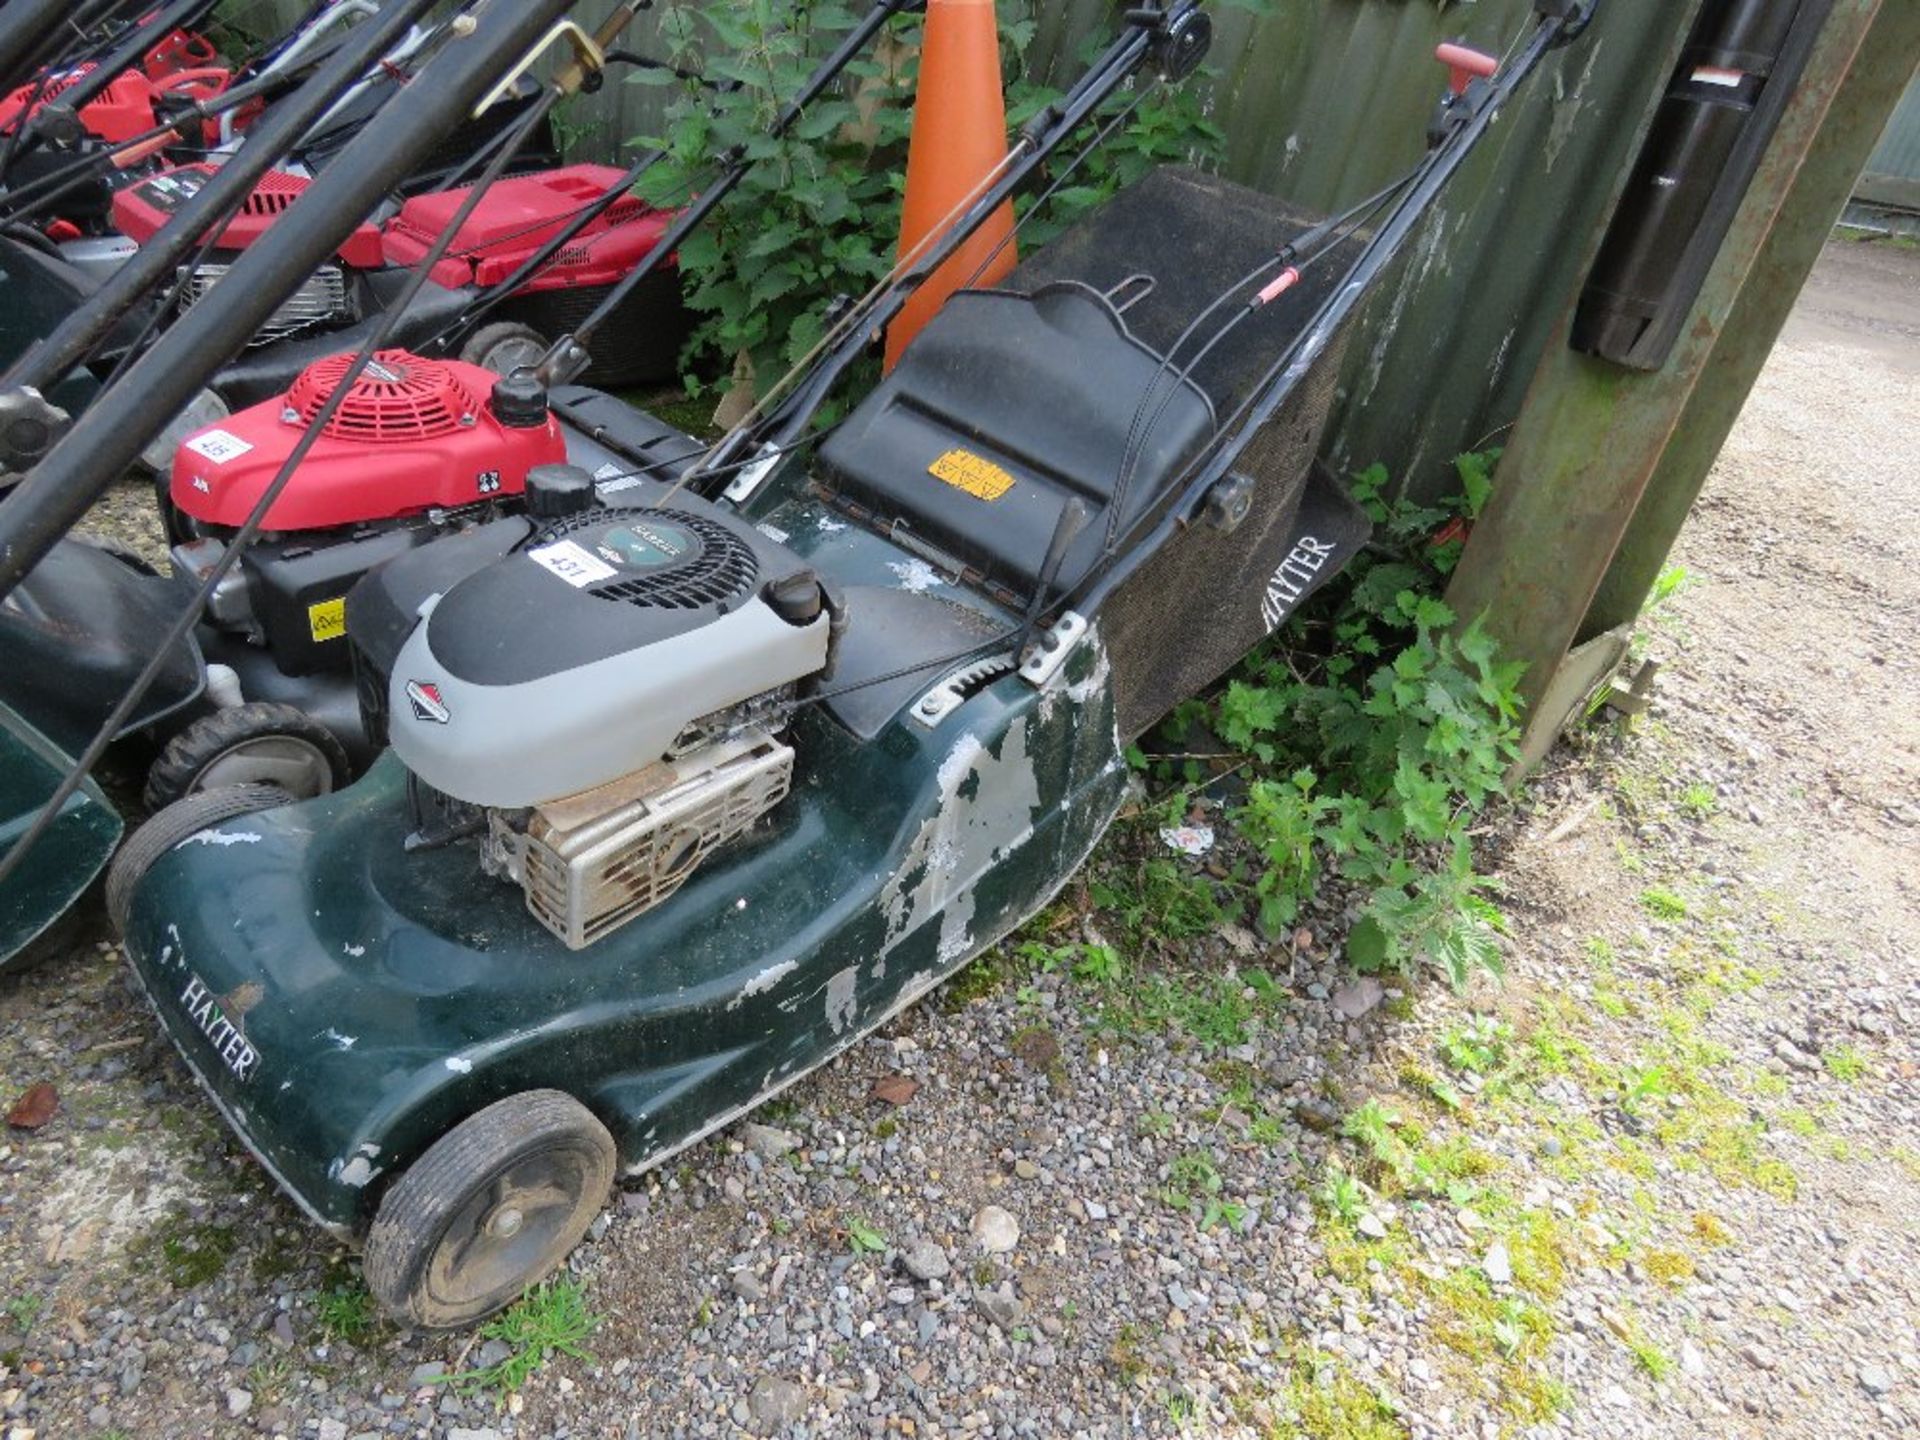 HAYTER HARRIER 48 ROLLER MOWER WITH COLLECTOR.....THIS LOT IS SOLD UNDER THE AUCTIONEERS MARGIN SCHE - Image 3 of 3